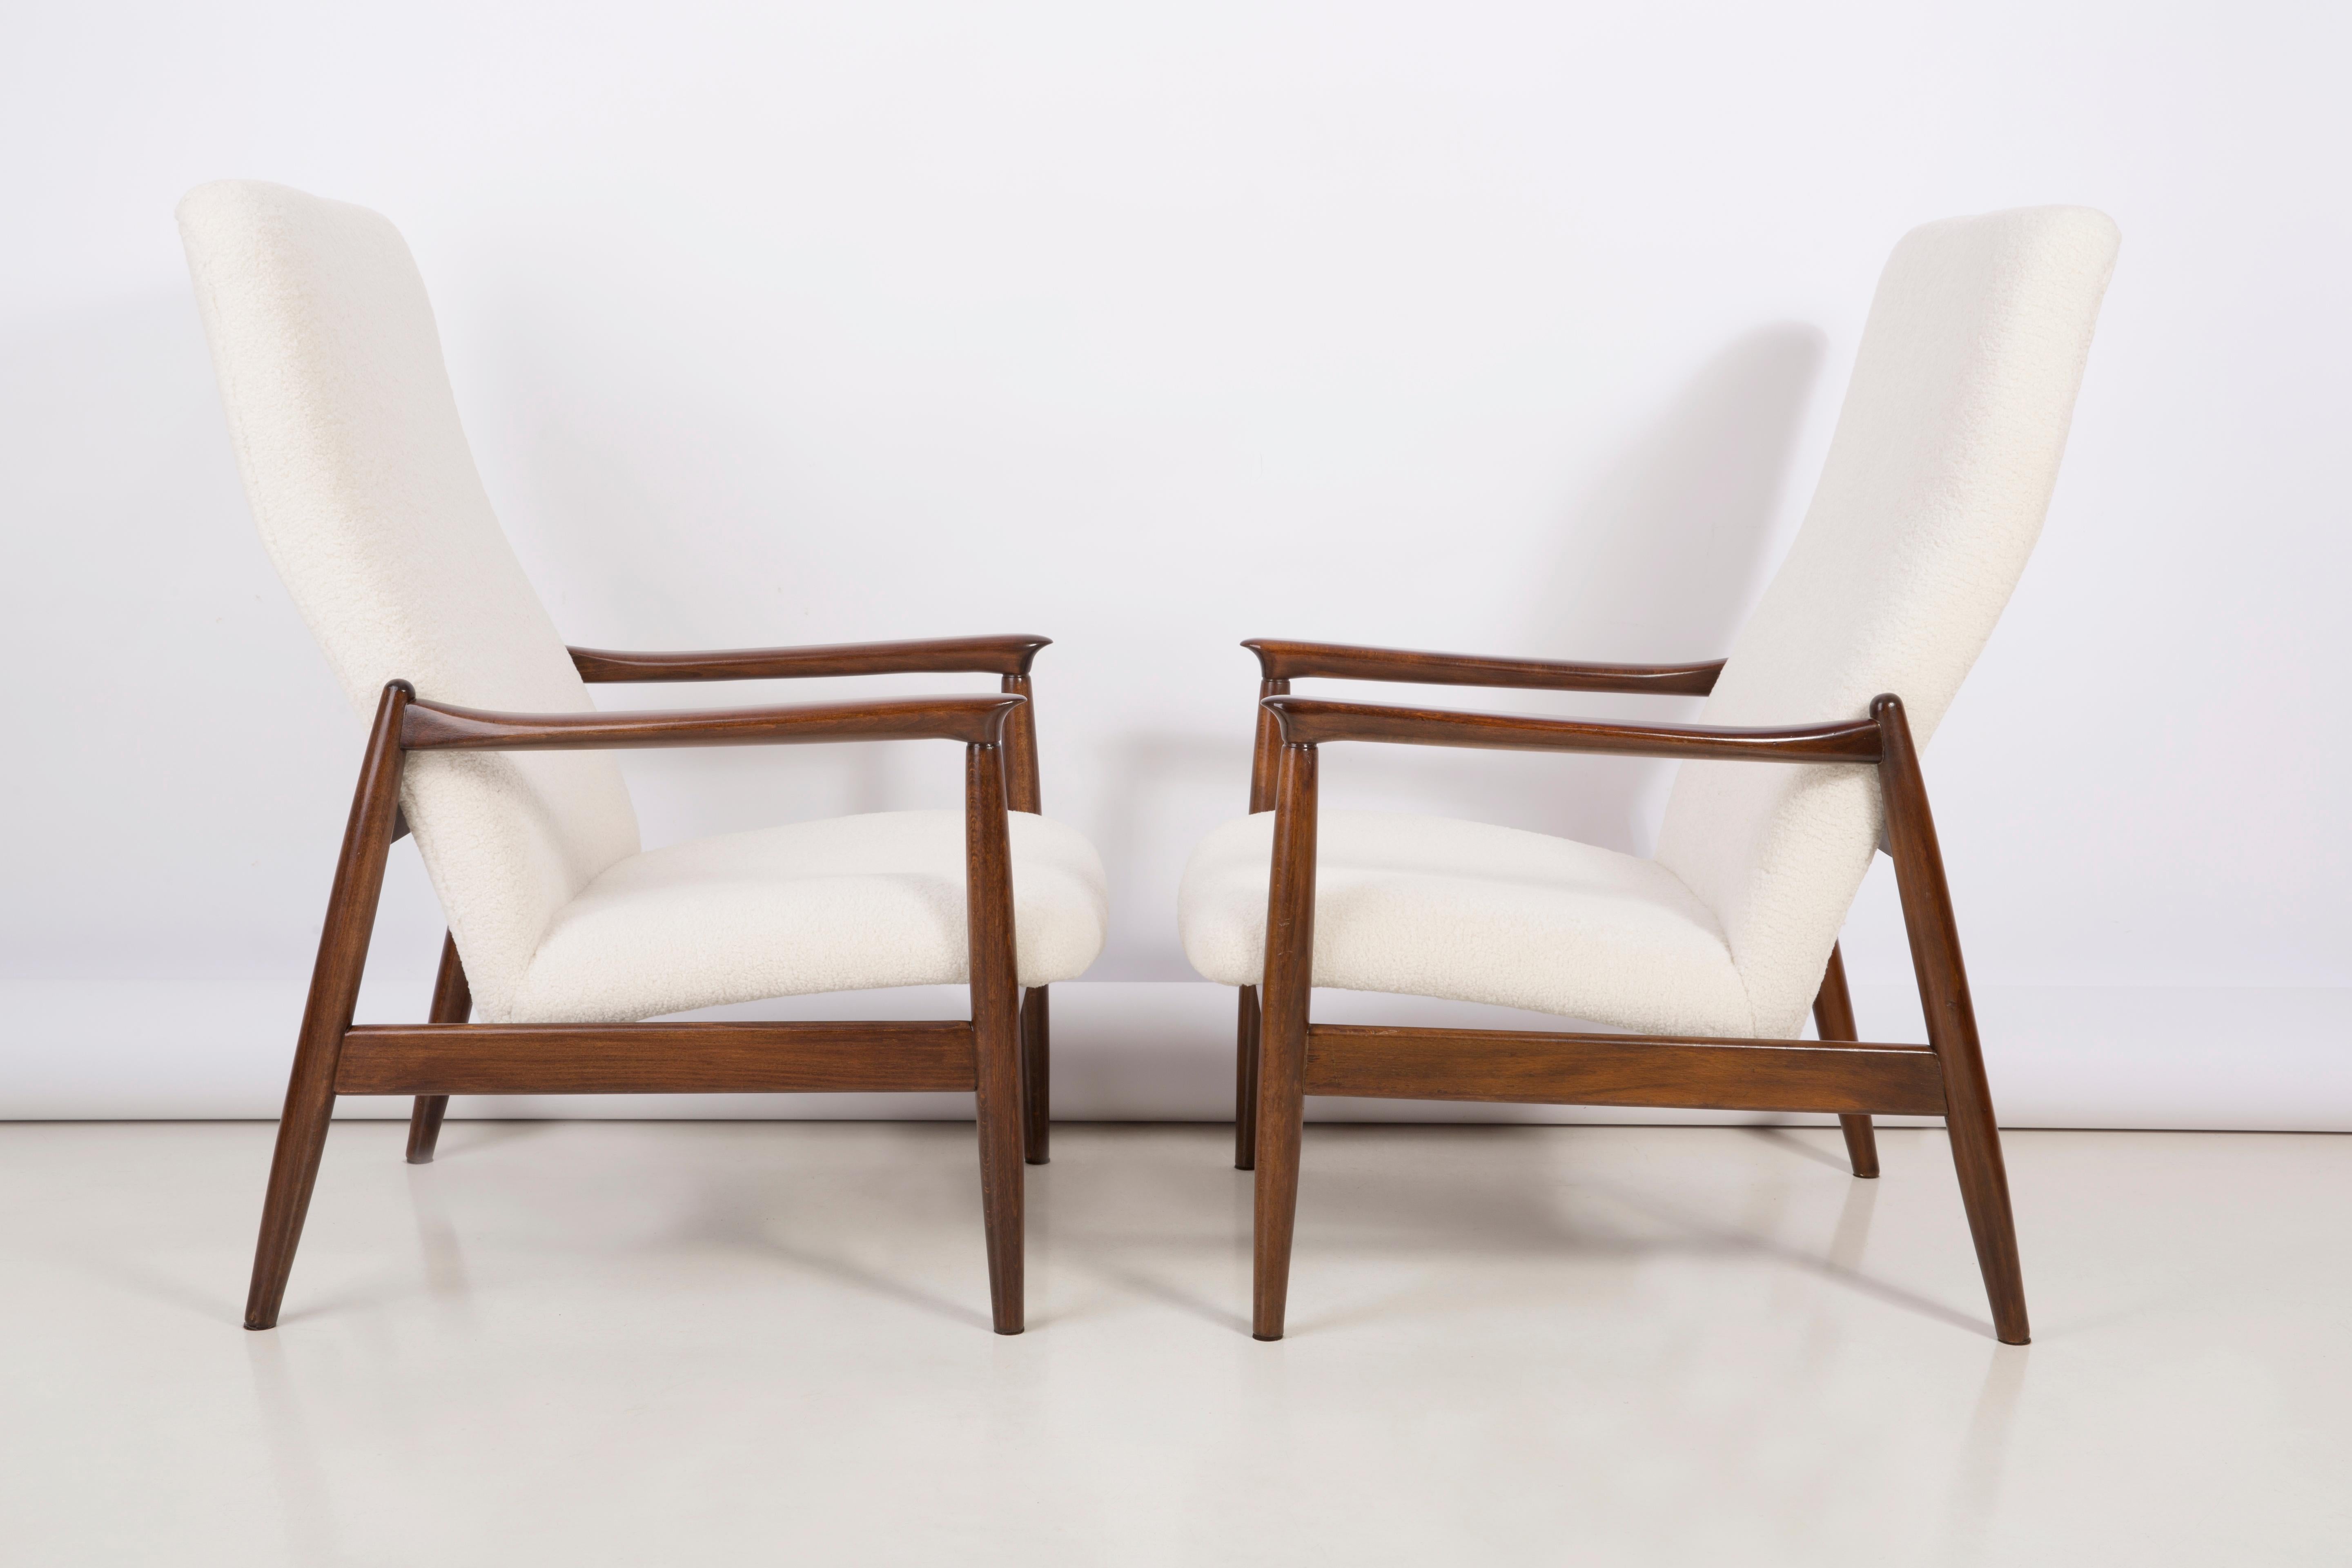 Polish Set of Crème Boucle Armchairs and Stools, Gfm-64 High, Edmund Homa, 1960s For Sale